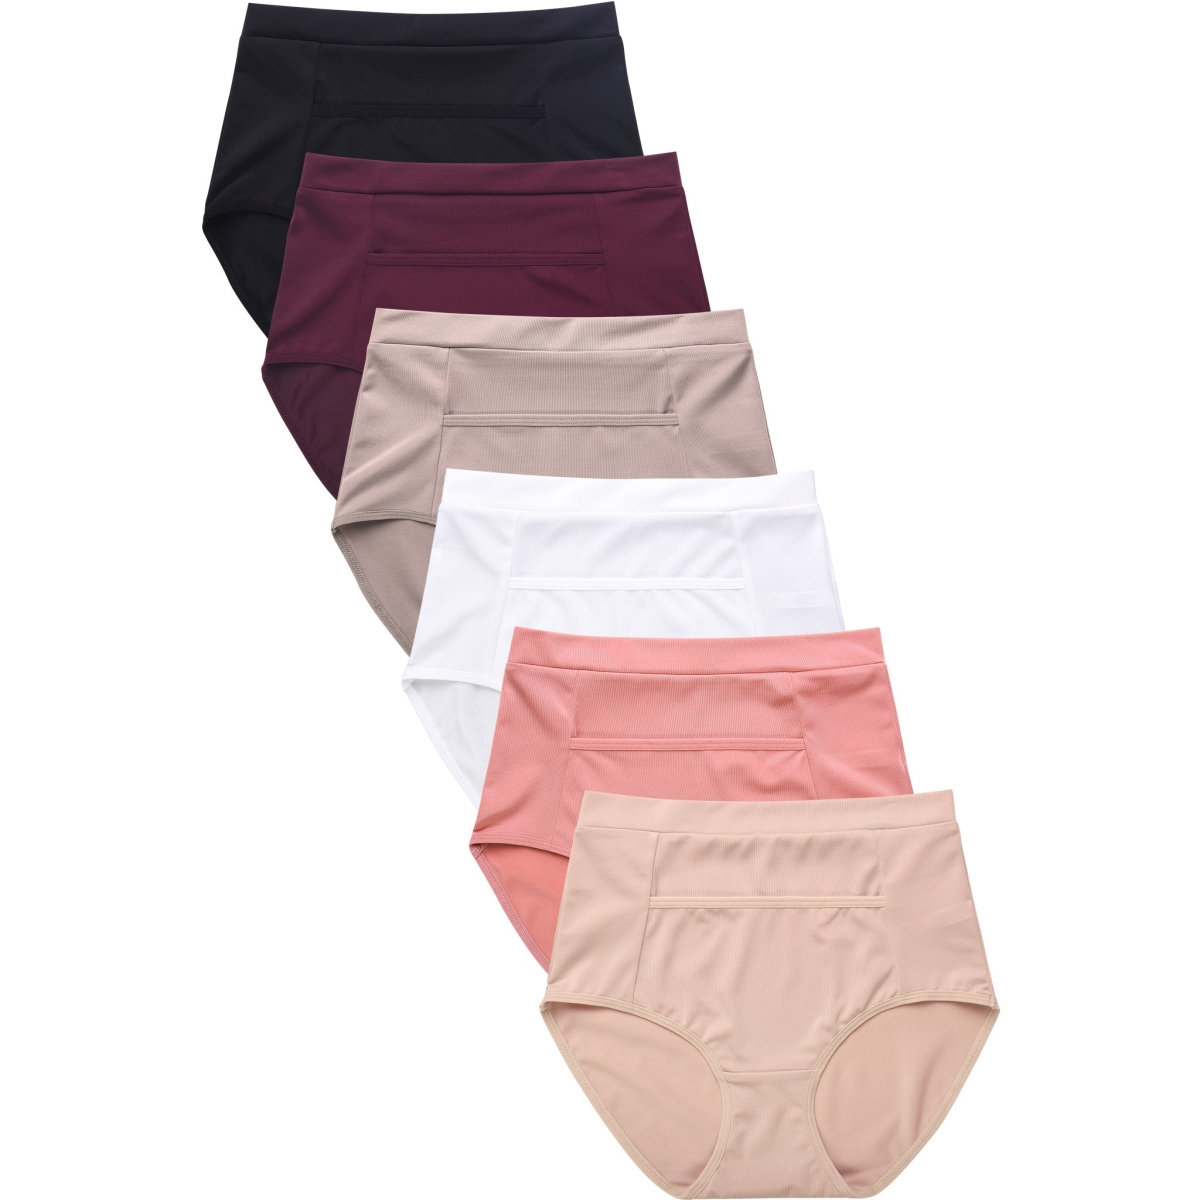 Picture of 247 Frenzy 247-GL7180-XL Sofra Womens Essentials Shapewear Control Panty Underwear - Assorted Color - Extra Large - Pack of 6